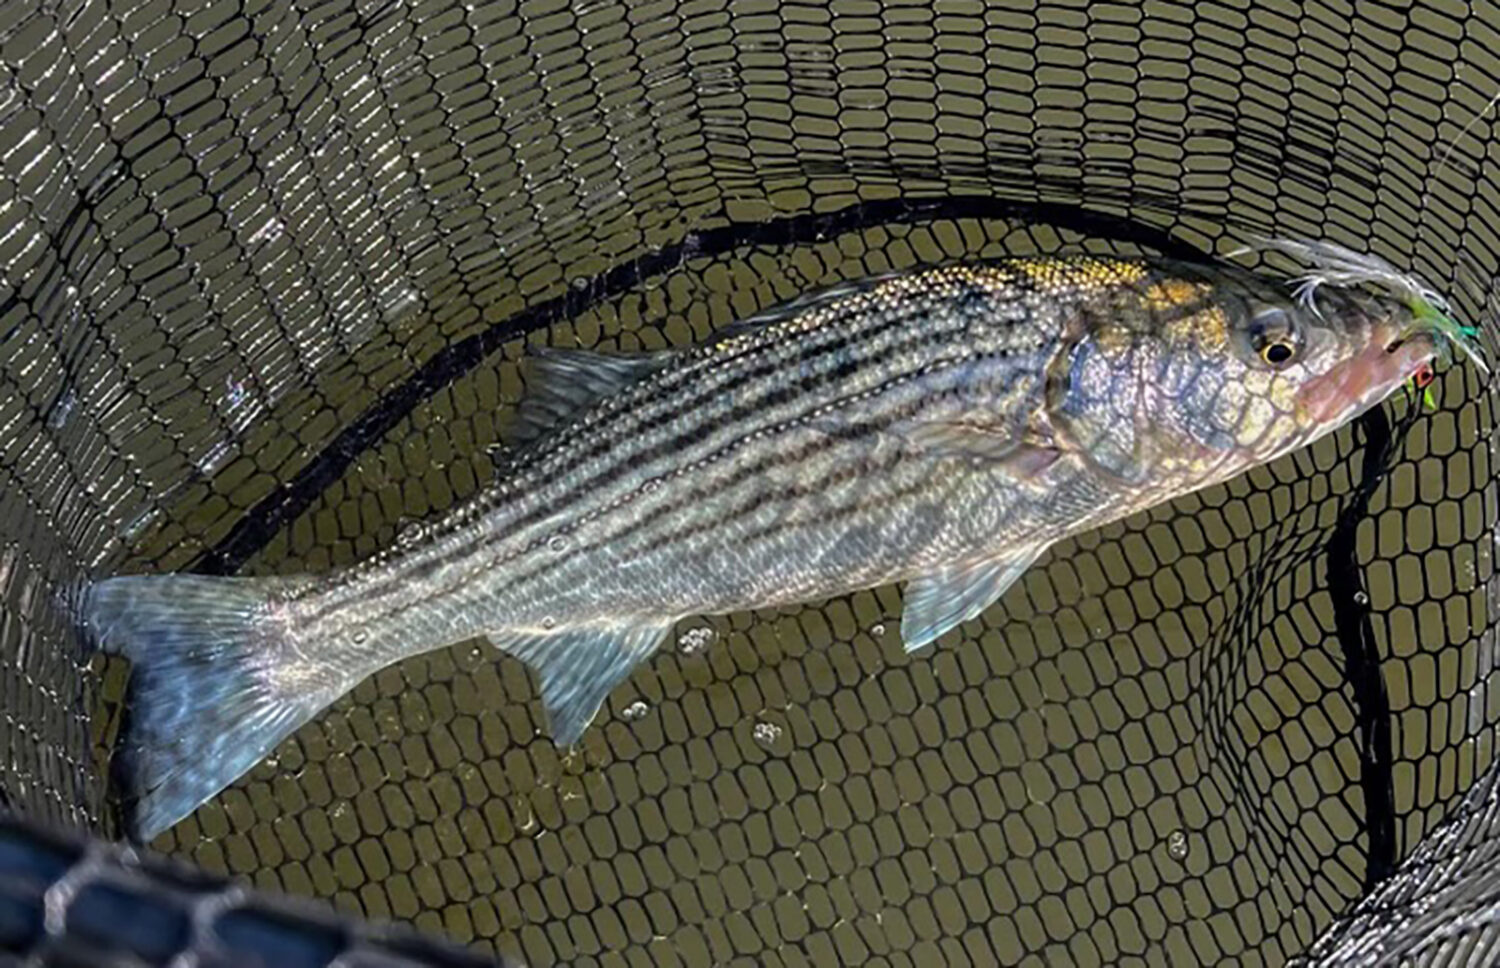 An image of a striped bass in a net held above the water